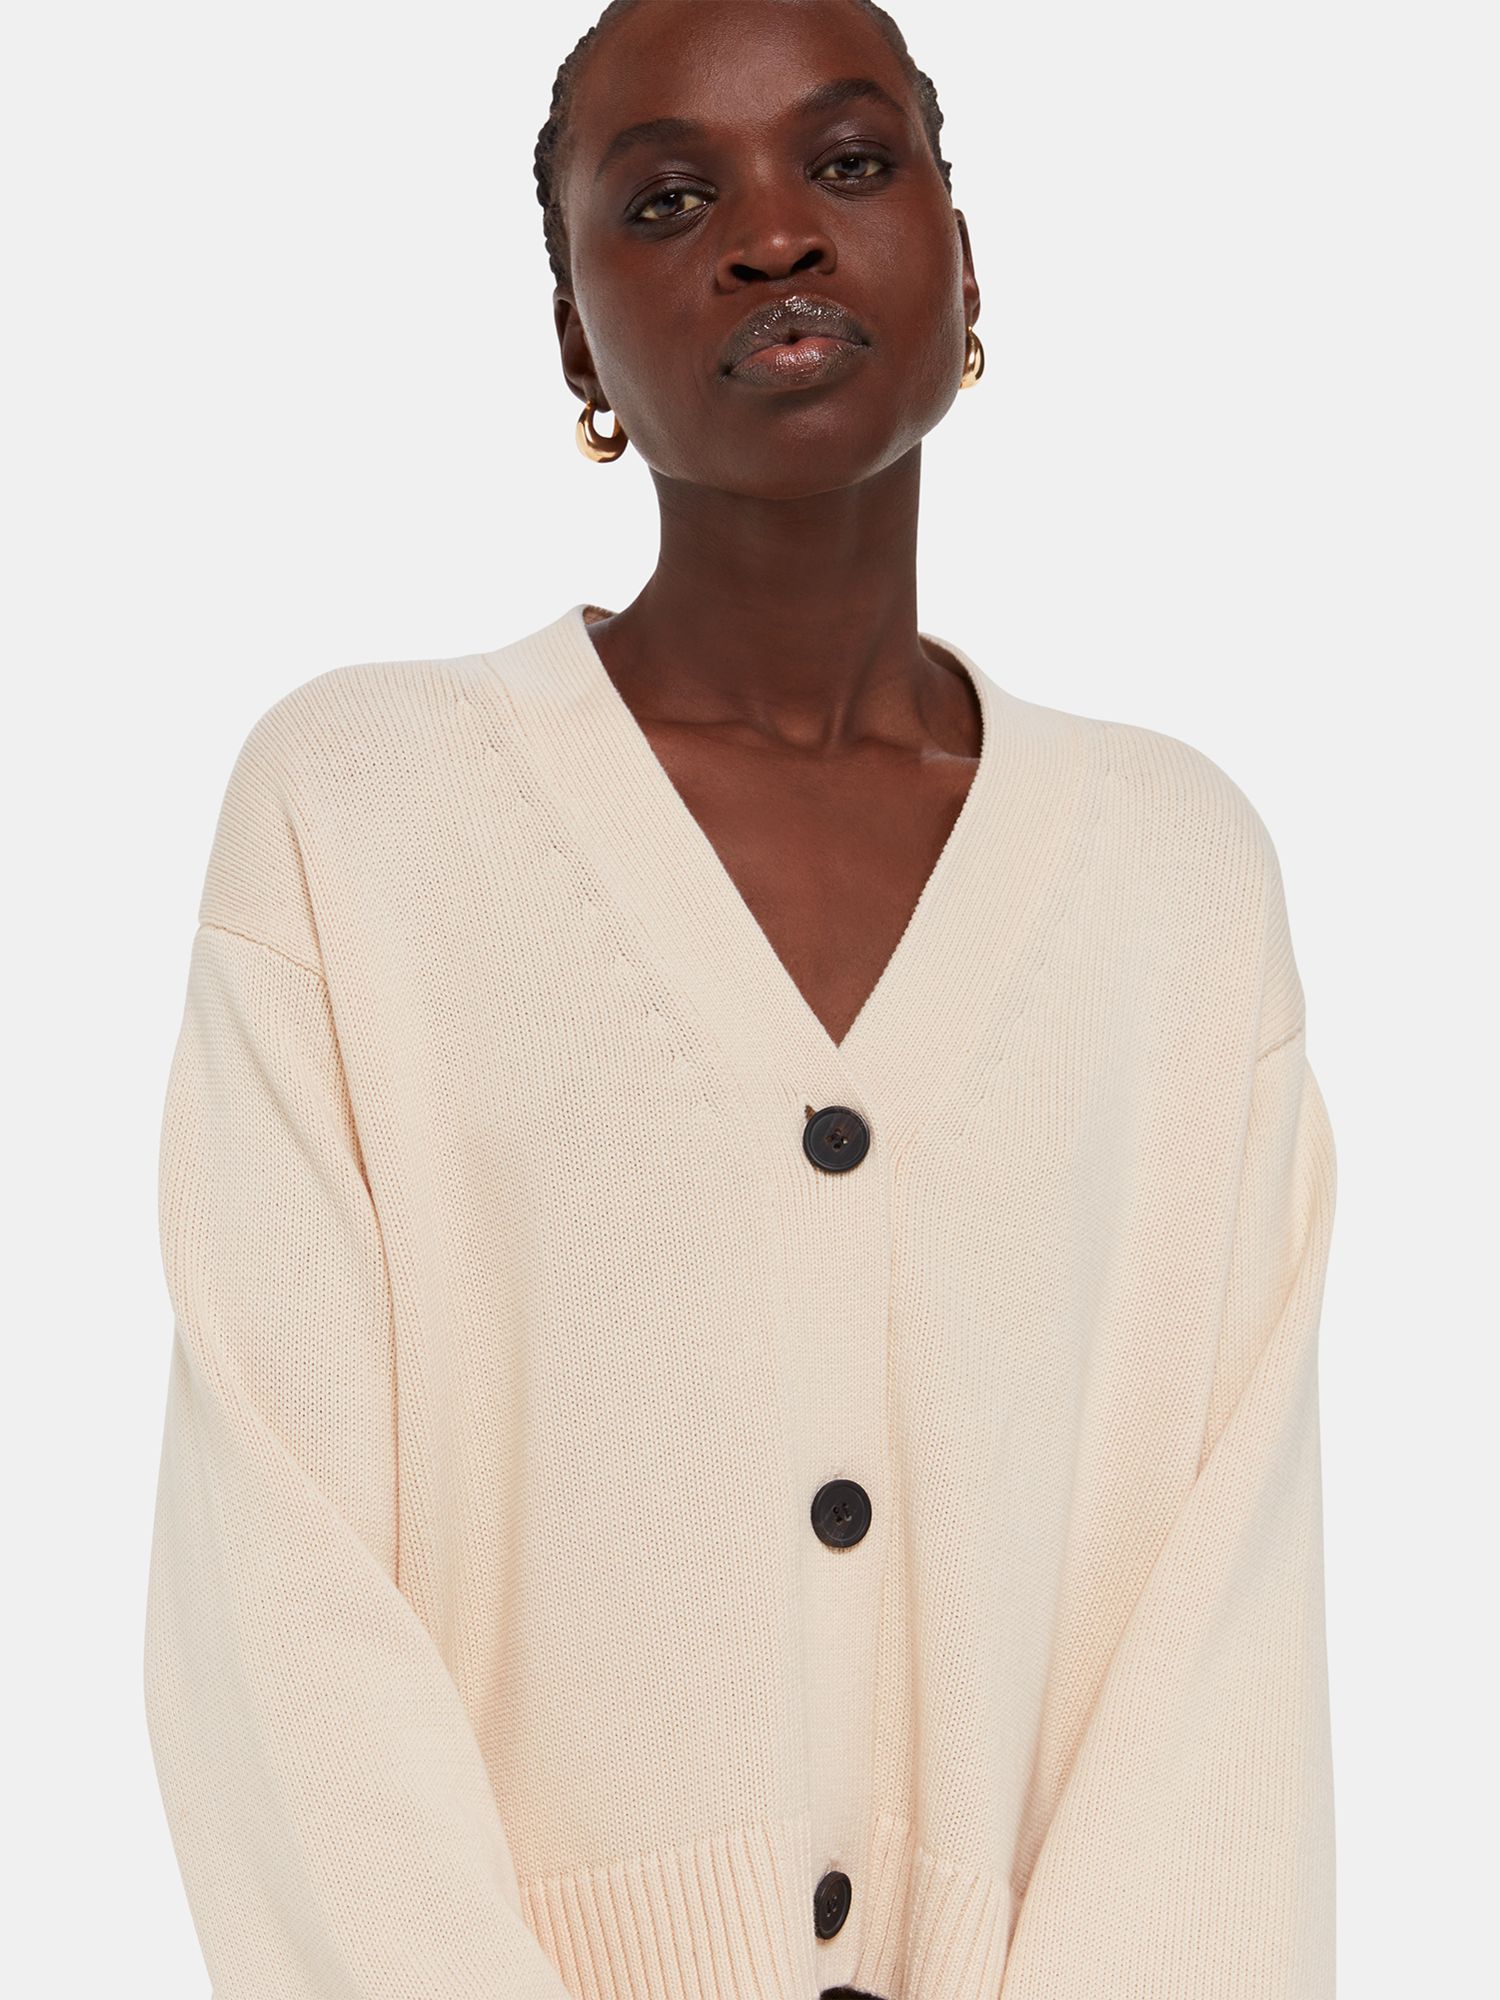 Whistles Nina Button Front Cardigan, Ivory, XS